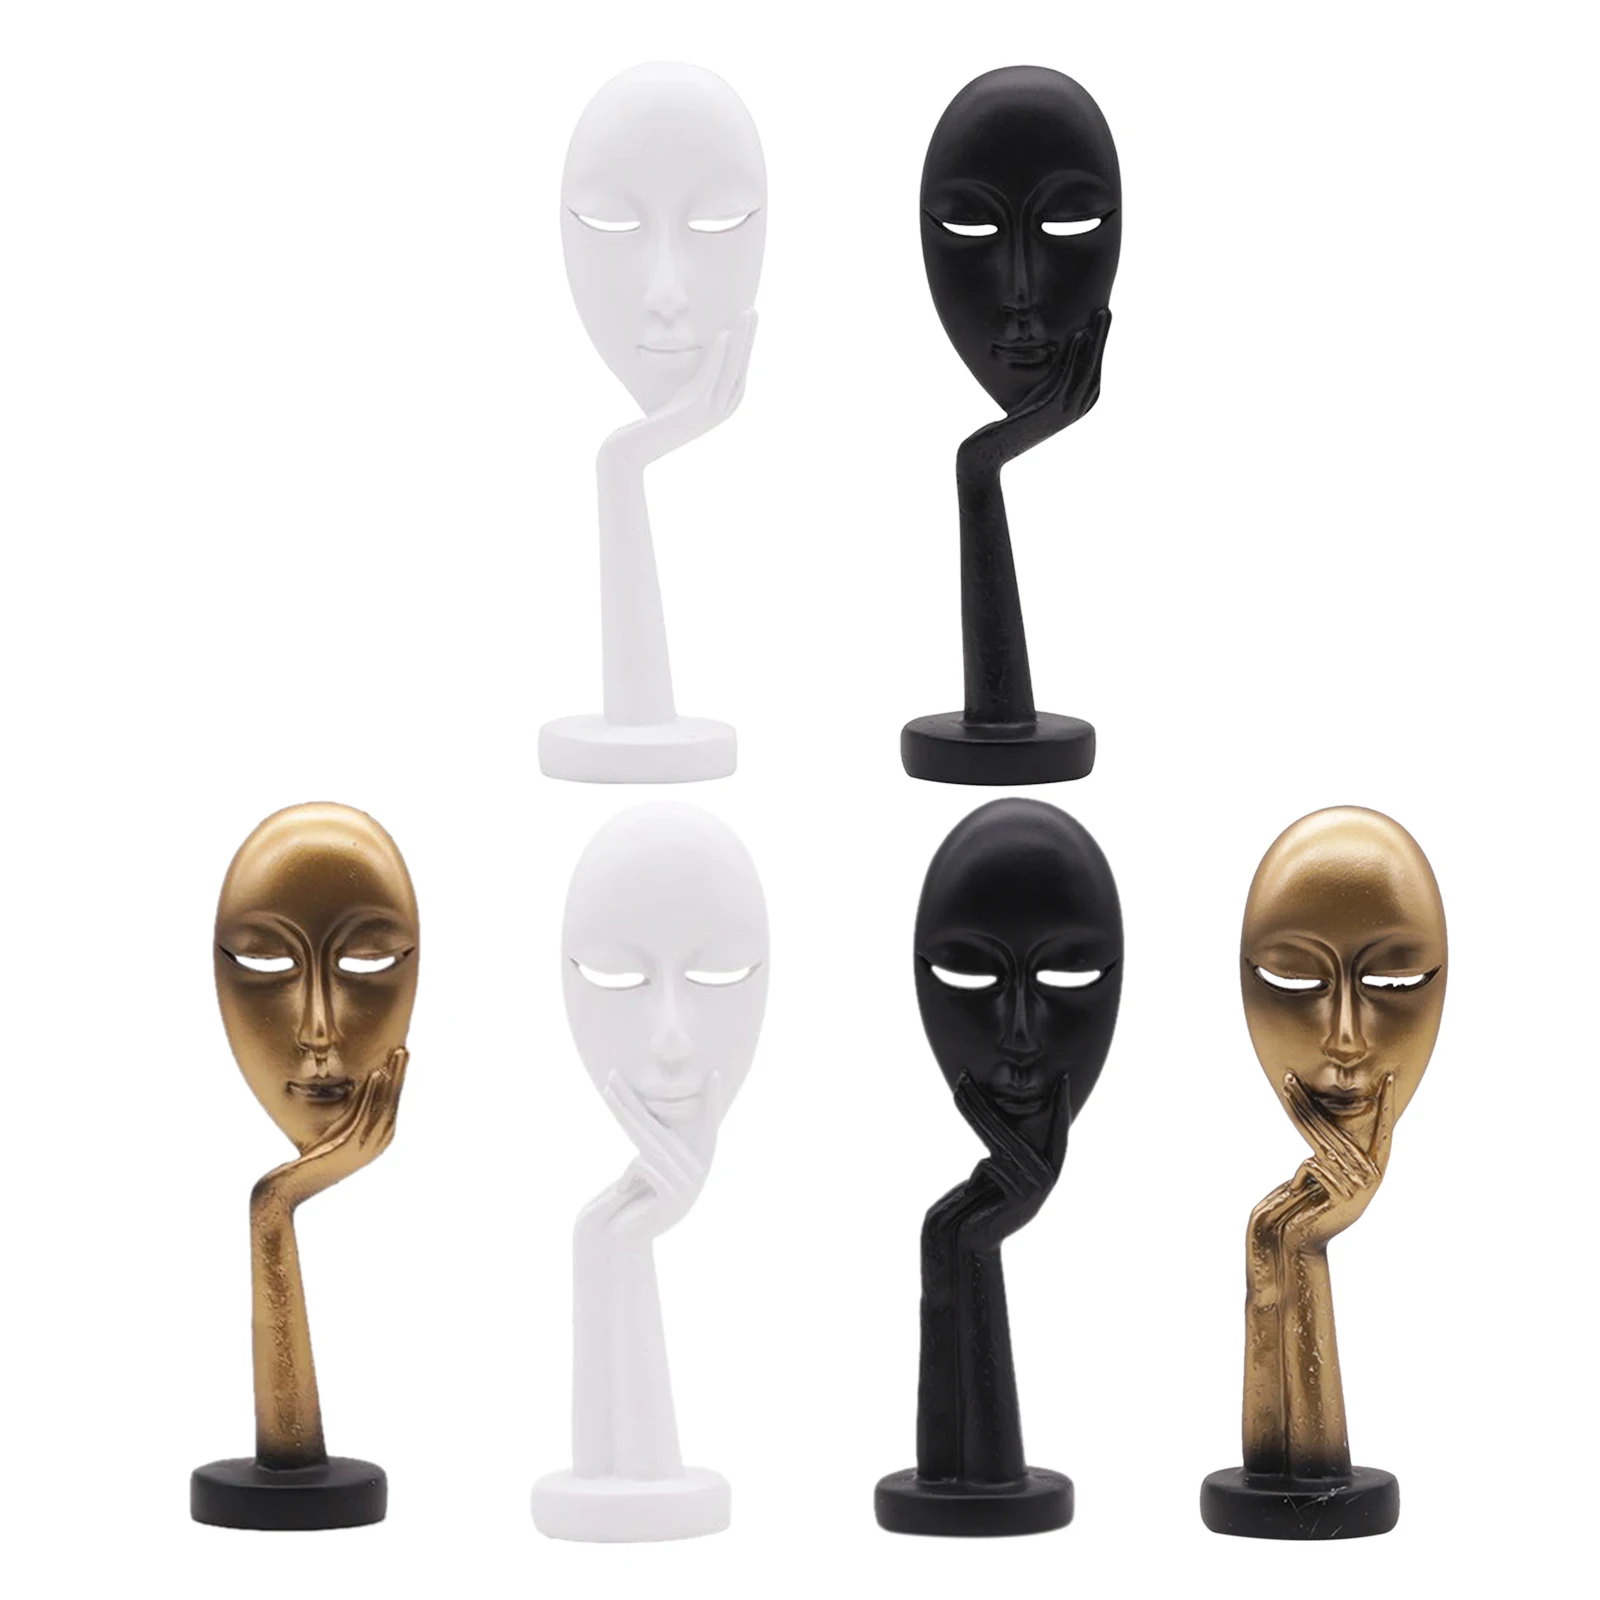 Modern Abstract Statues Sculpture Resin Artistic Thinker Figurine Thinking Man Figurines Desktop Decorations, Home Office Decor